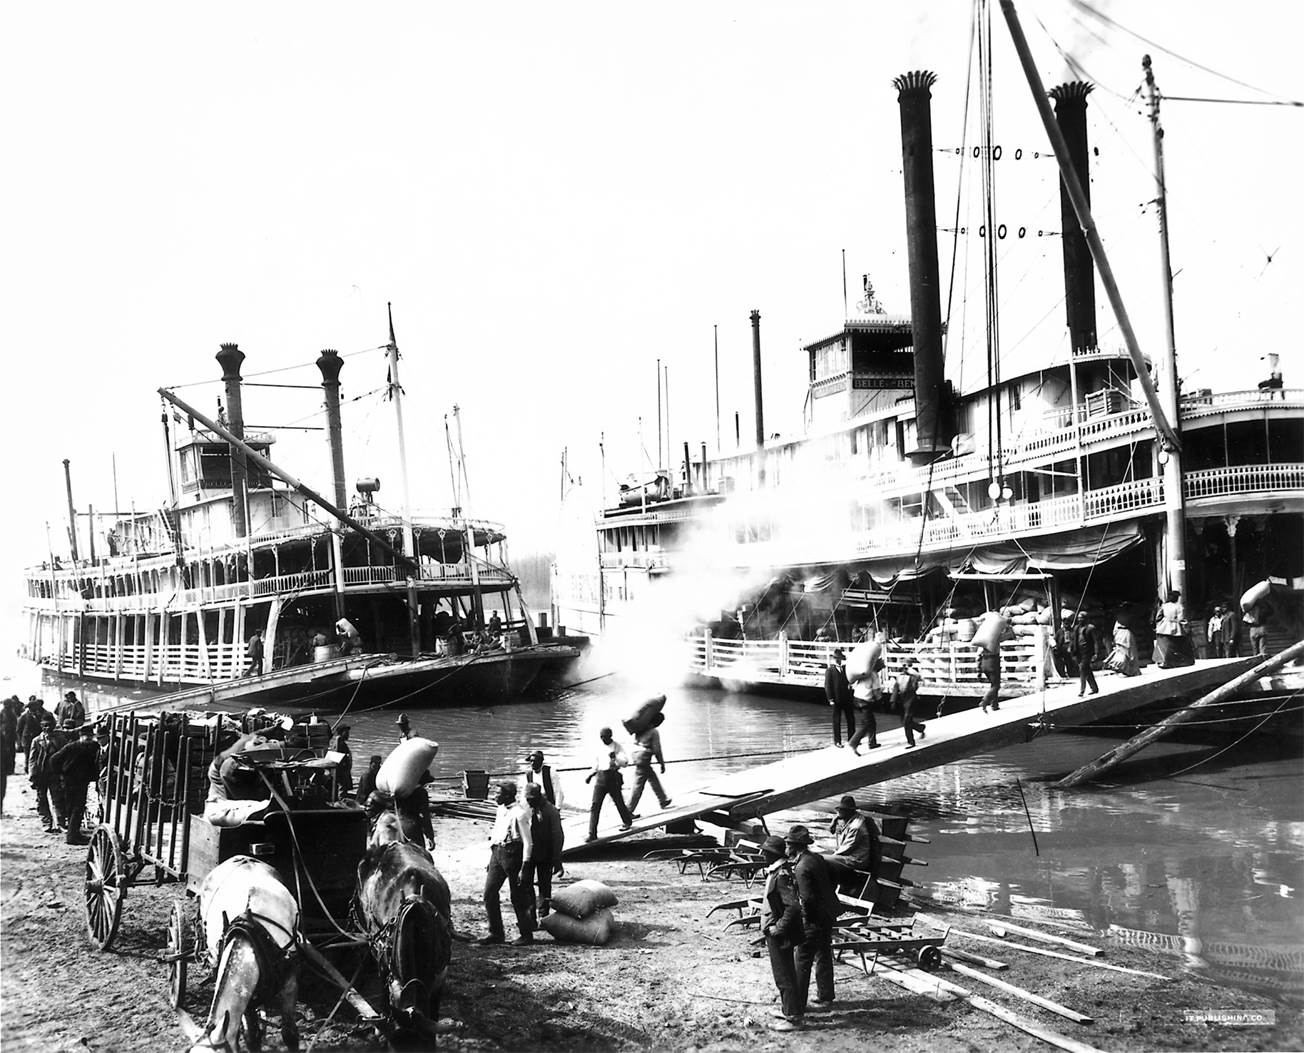 A sidewheeler on the Mississippi. In 1856 Samuel Clemens became an apprentice to a steamboat pilot a